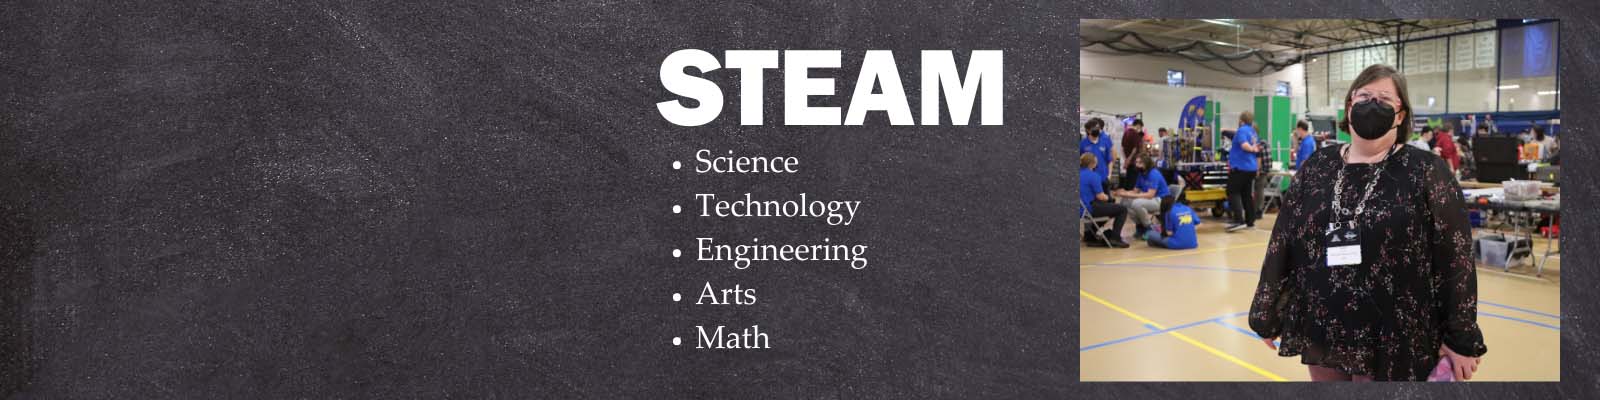 A photo of Karen McCalla with text that says, "STEAM: science, technology, engineering, arts, math"